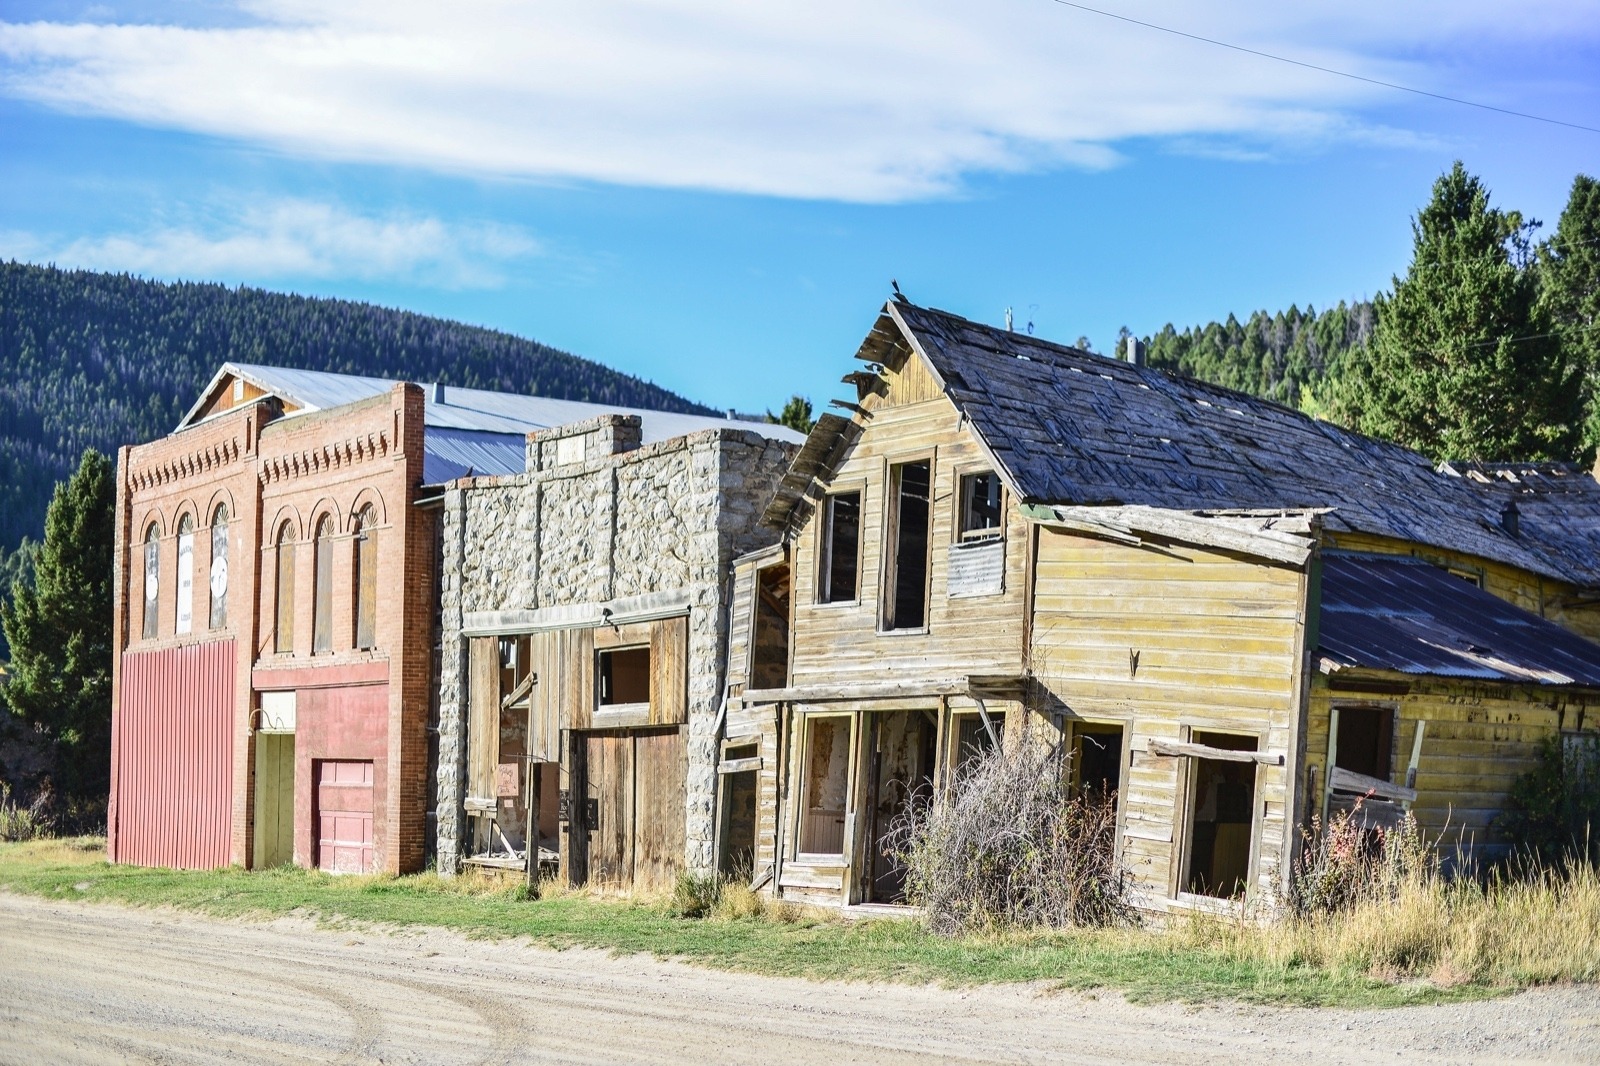 Marysville, a mining ghost town in Montana. Photo courtesy U.S. Air Force/Tech. Sgt. Chad Thompson